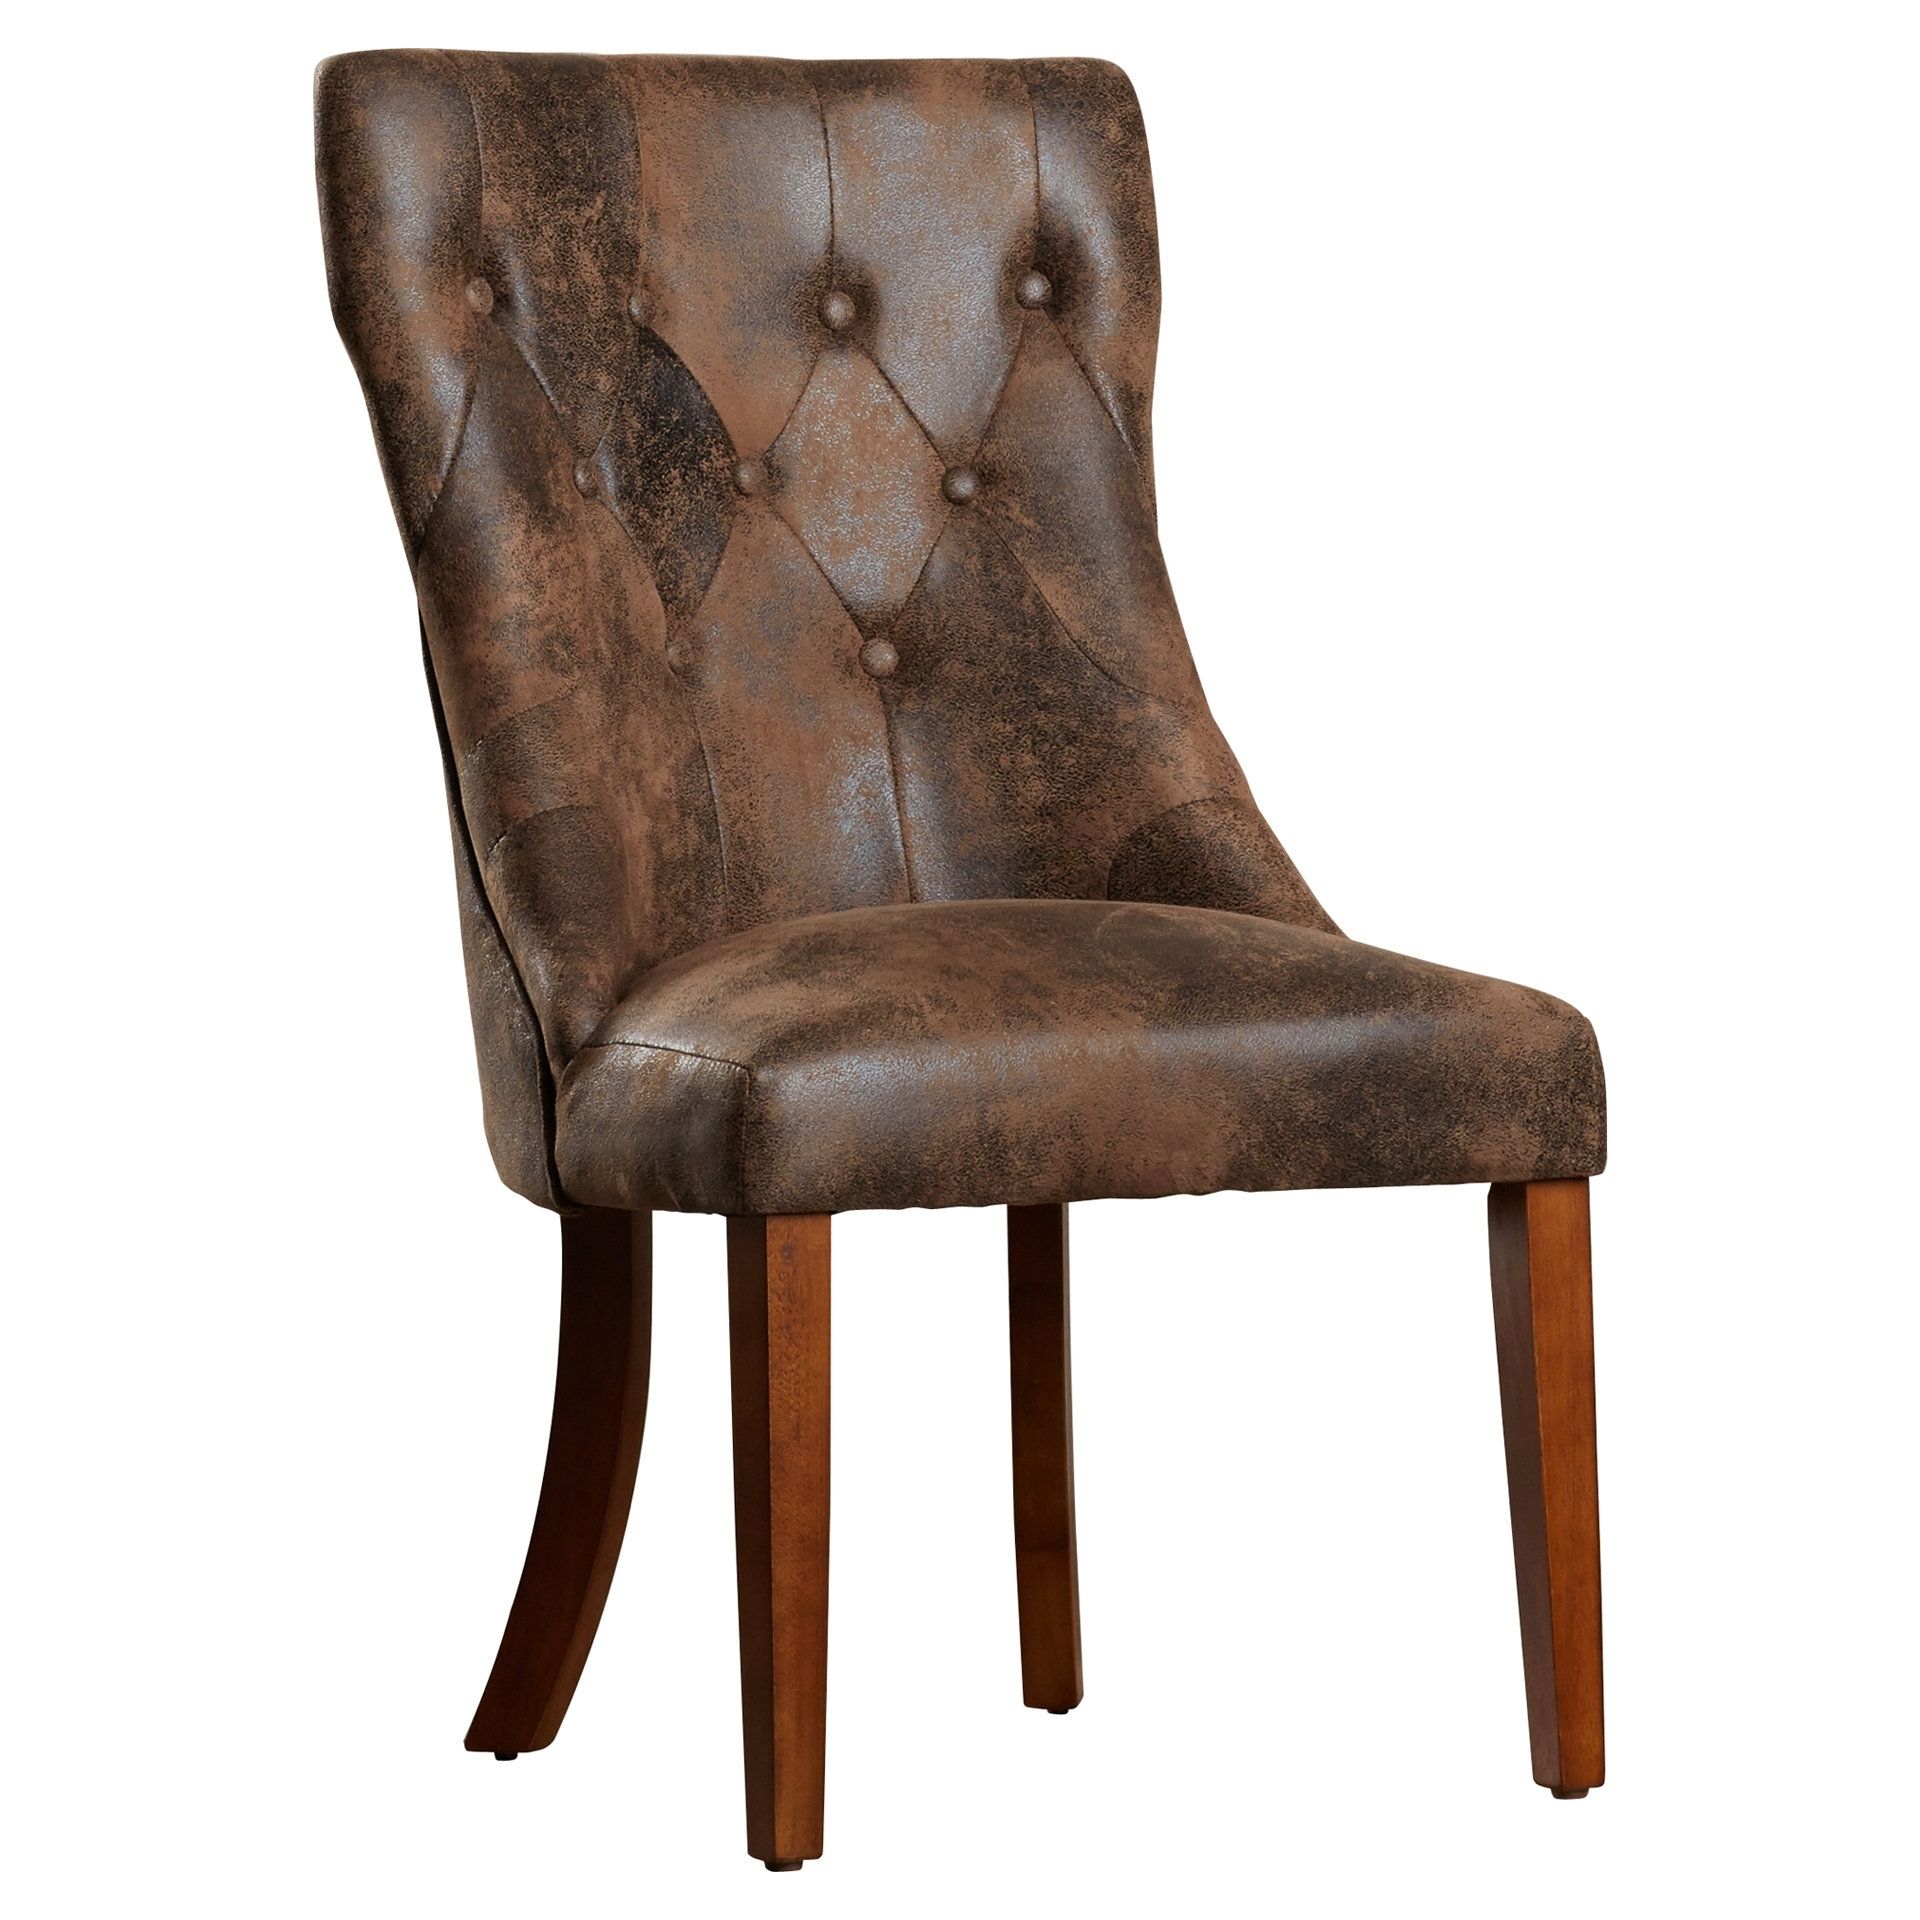 Wayfair Throughout Most Popular Caira Upholstered Side Chairs (View 20 of 20)